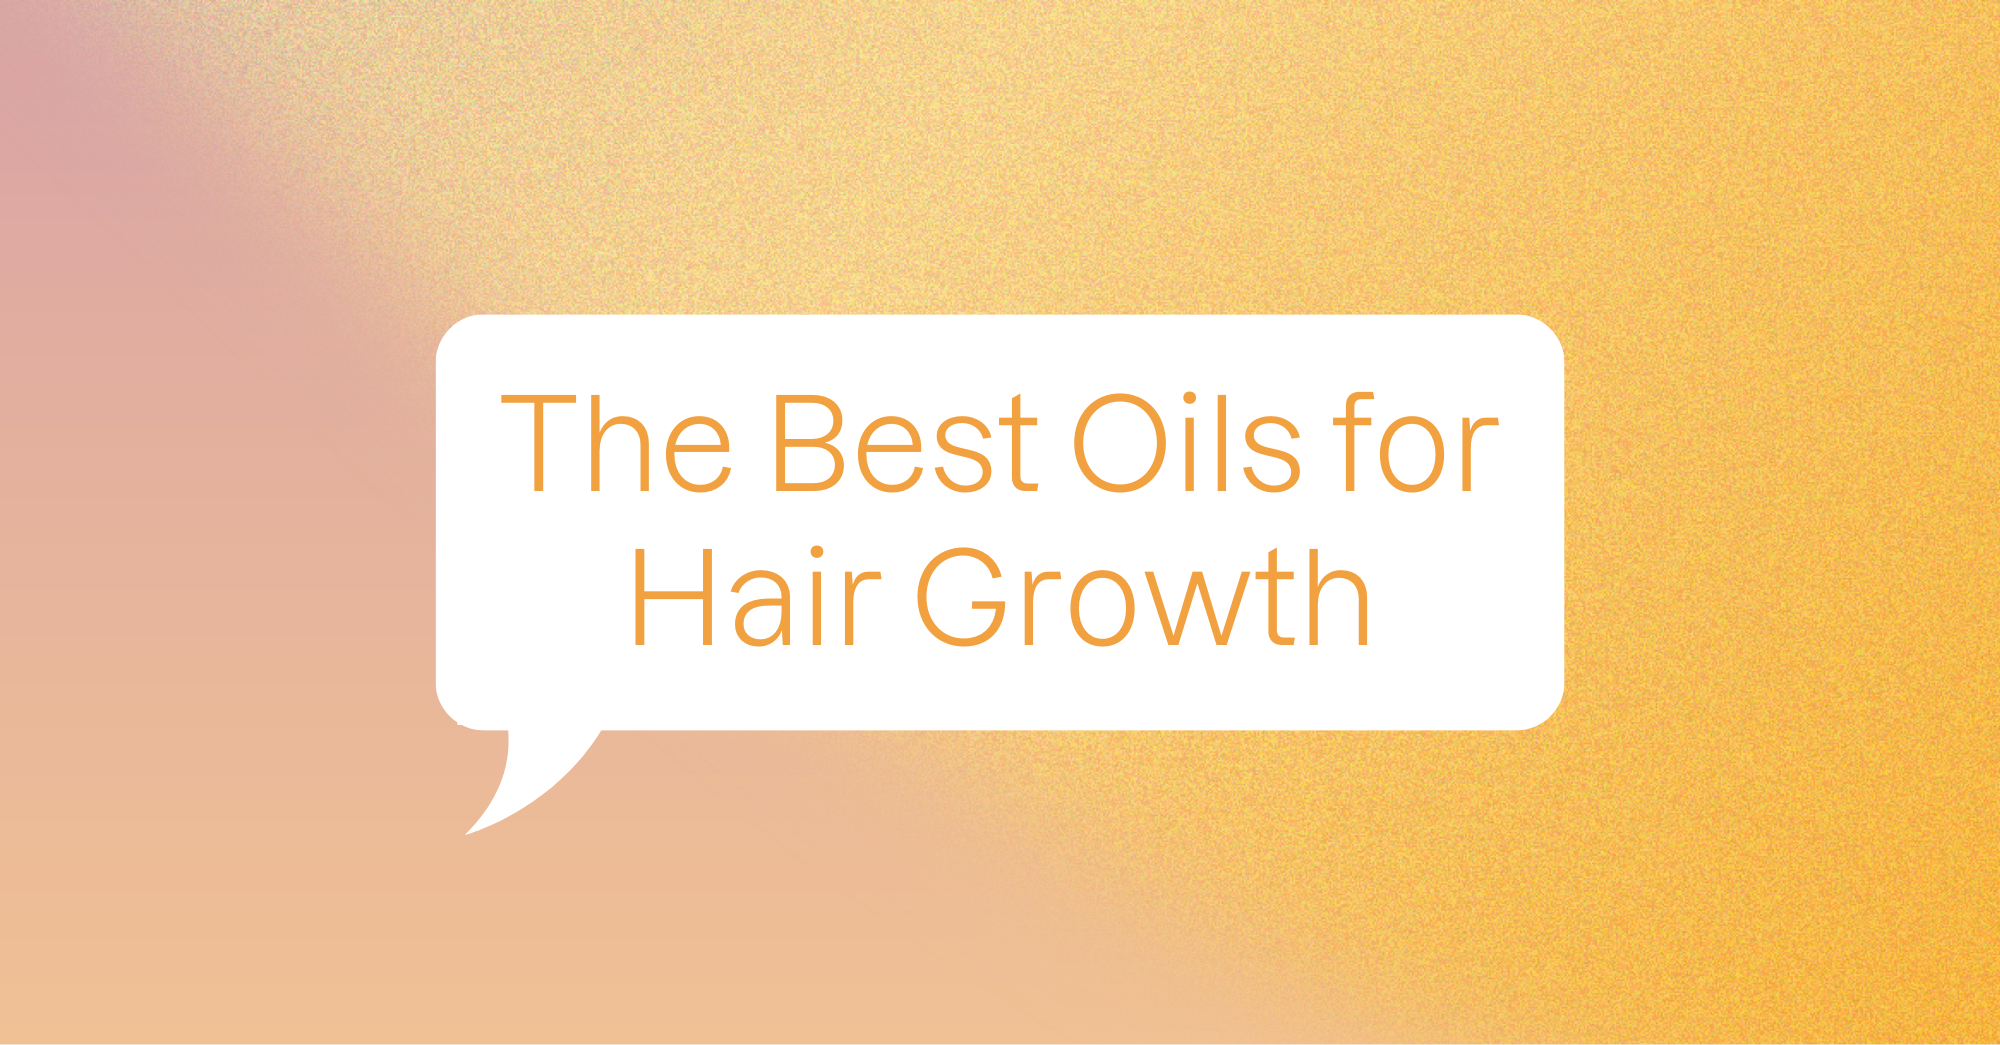 The Best Oils for Hair Growth